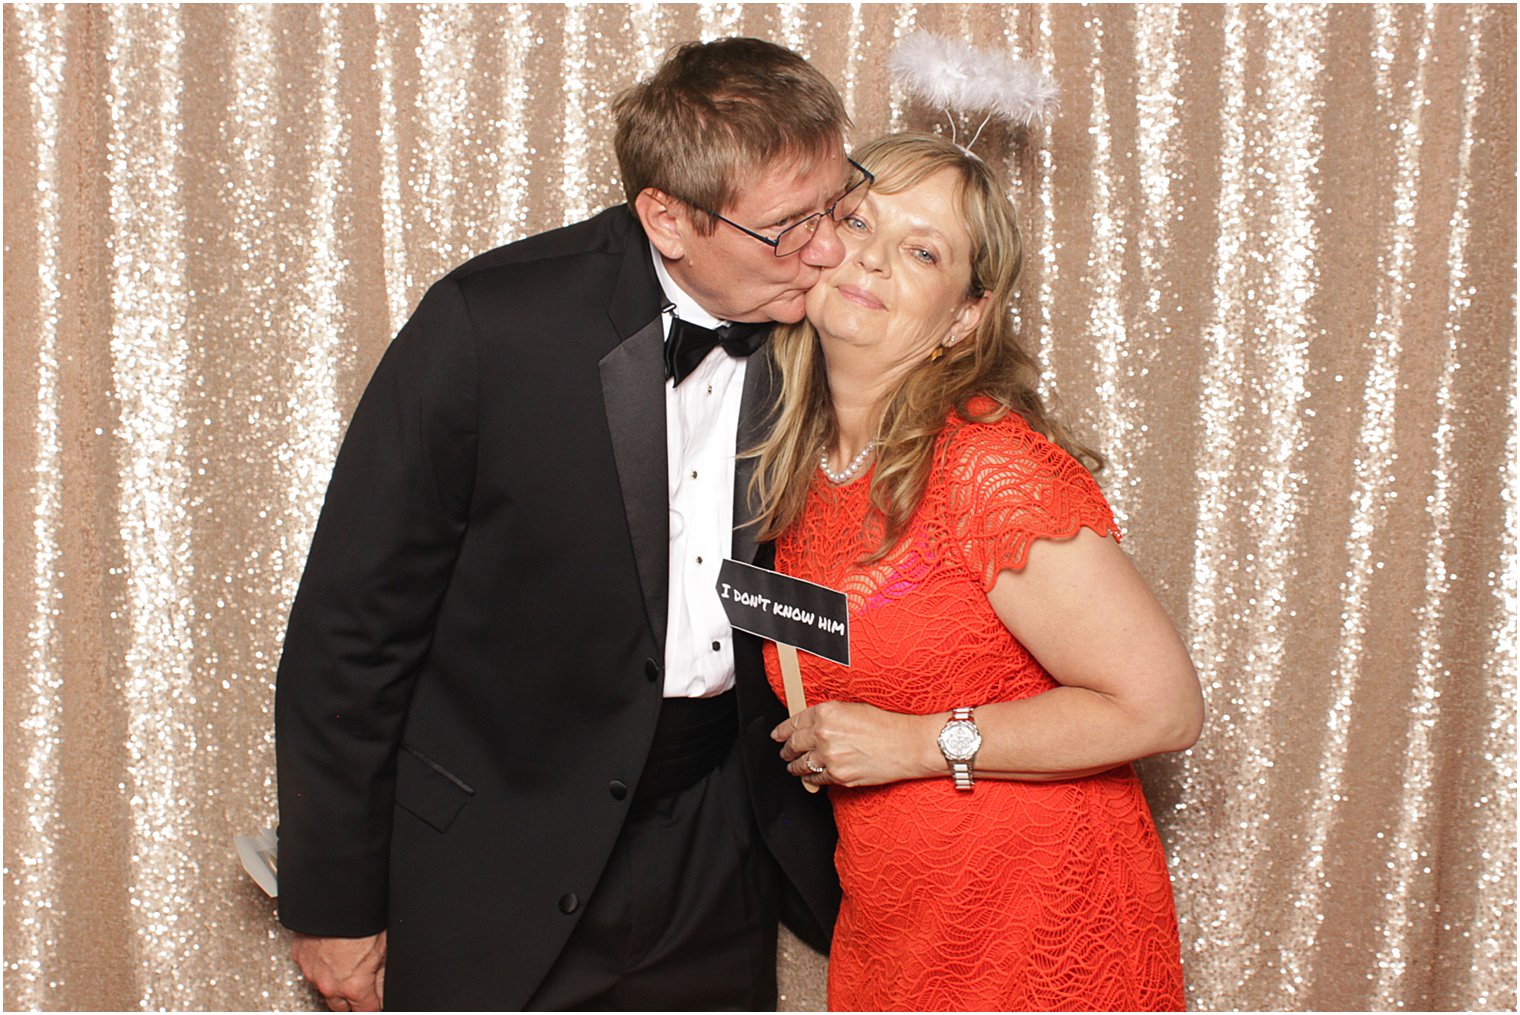 man kisses wife during The Manor Photo Booth